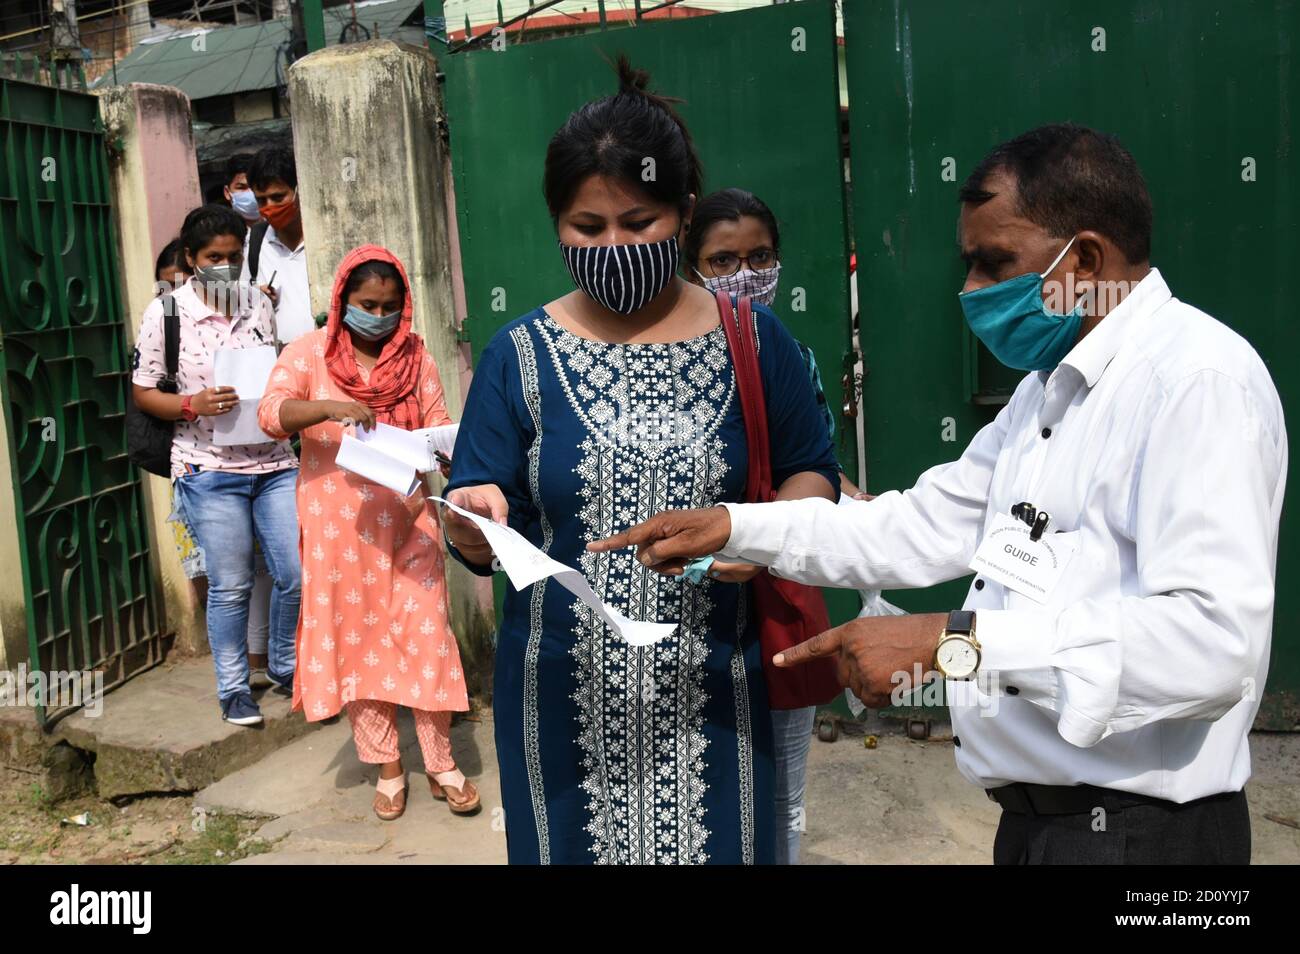 Guwahati, Assam, India. 4th Oct, 2020. Union Public Service Commission Examination candidates shows their proof as they enter in a examination center to appear in the Union Public Service Commission (UPSC ) Preliminary Examination 2020 in Guwahati Assam India on Sunday 4th October 2020. The Civil Services Examination is a nationwide competitive examination in India conducted by the Union Public Service Commission for recruitment to various Civil Services of the Government of India, including the Indian Administrative Service, Indian Foreign Service, and Indian Police Service (Credit Ima Stock Photo